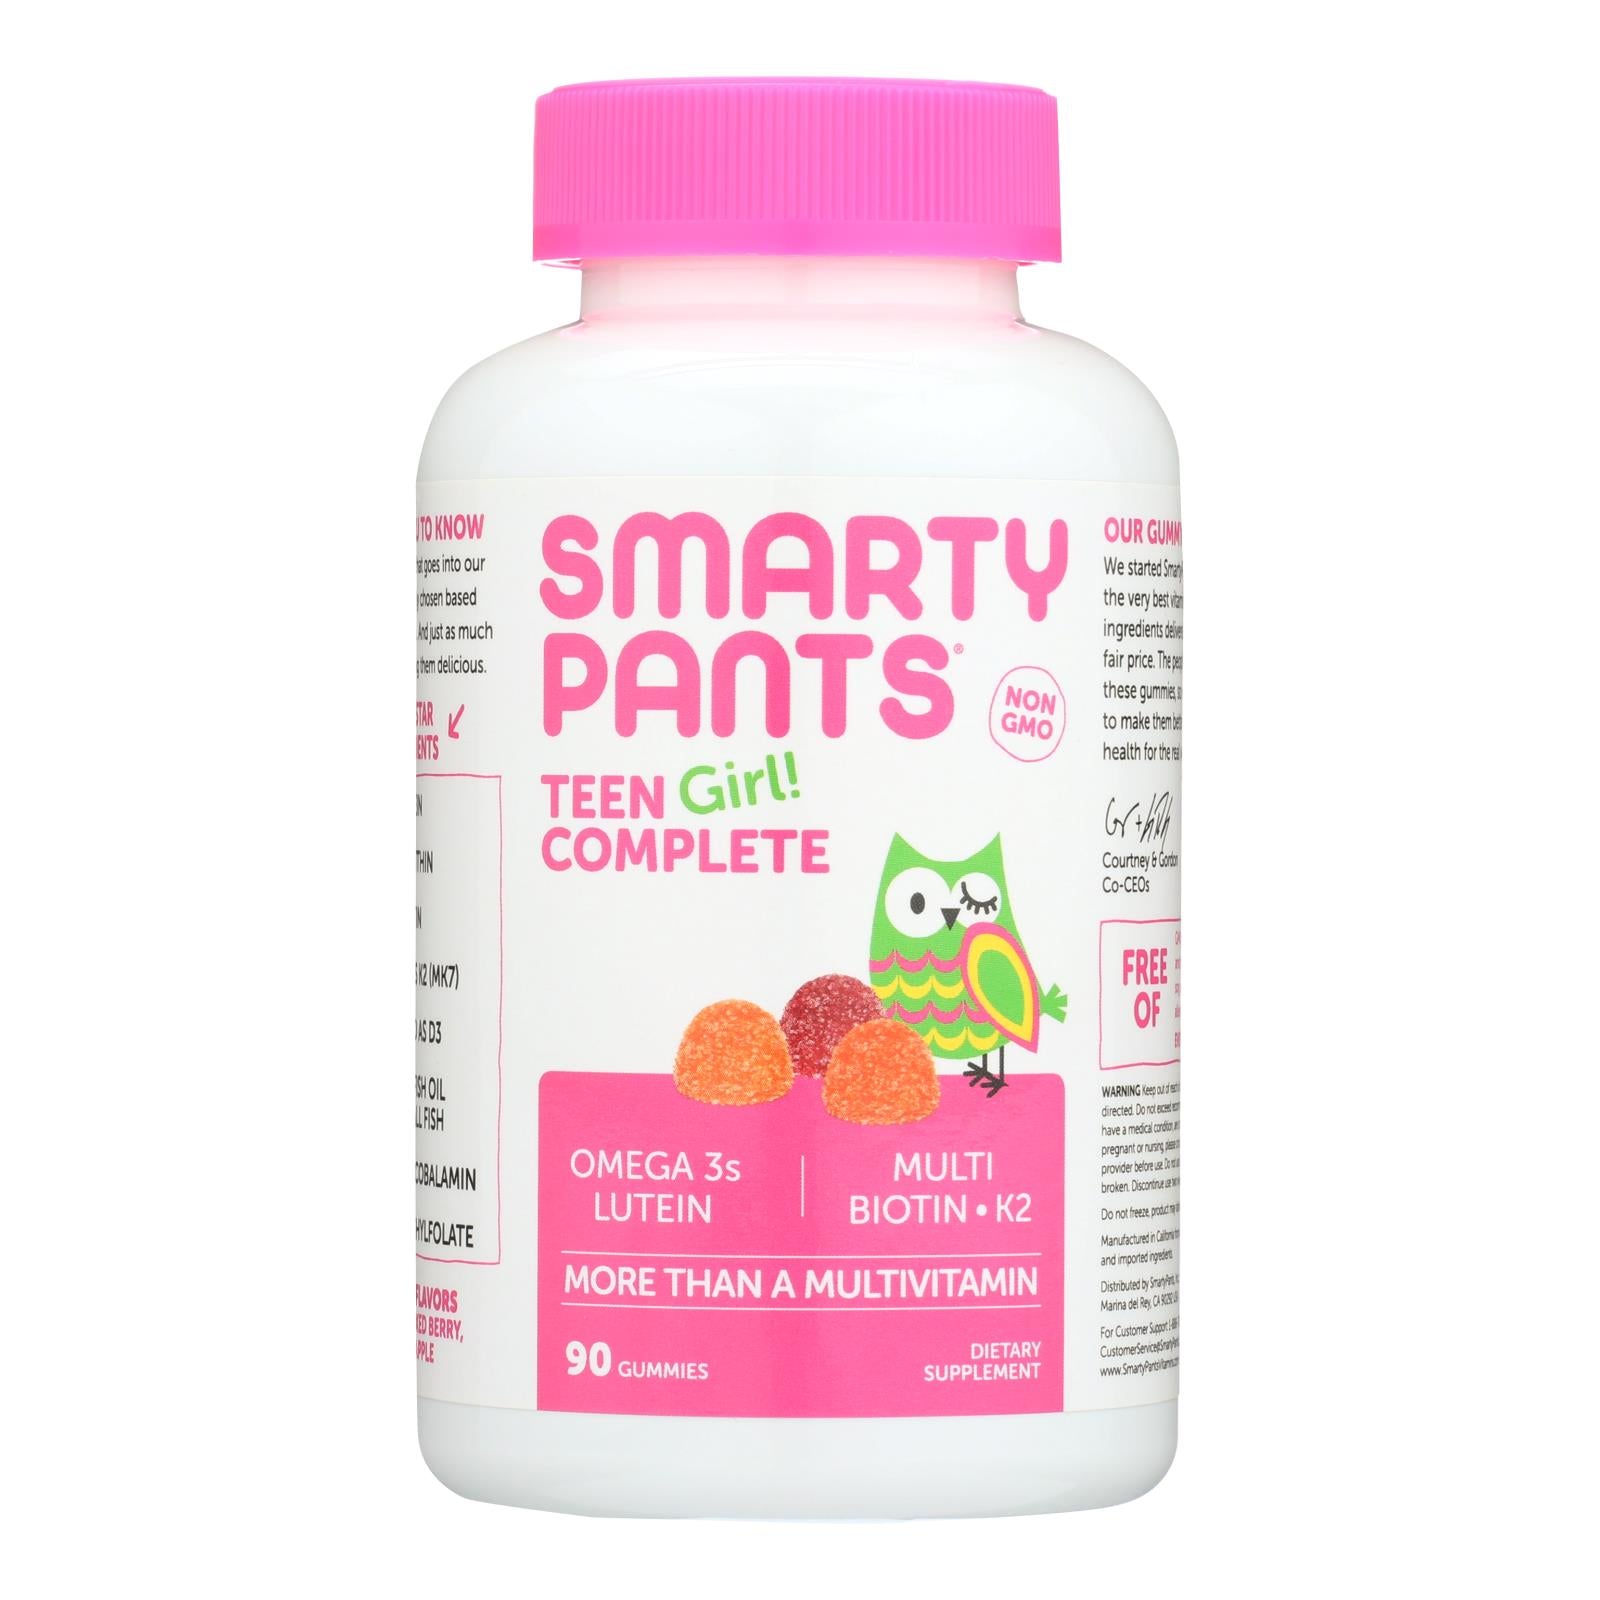 Smarty Pants Teen Girl! Complete Dietary Supplement  - 1 Each - 90 CT